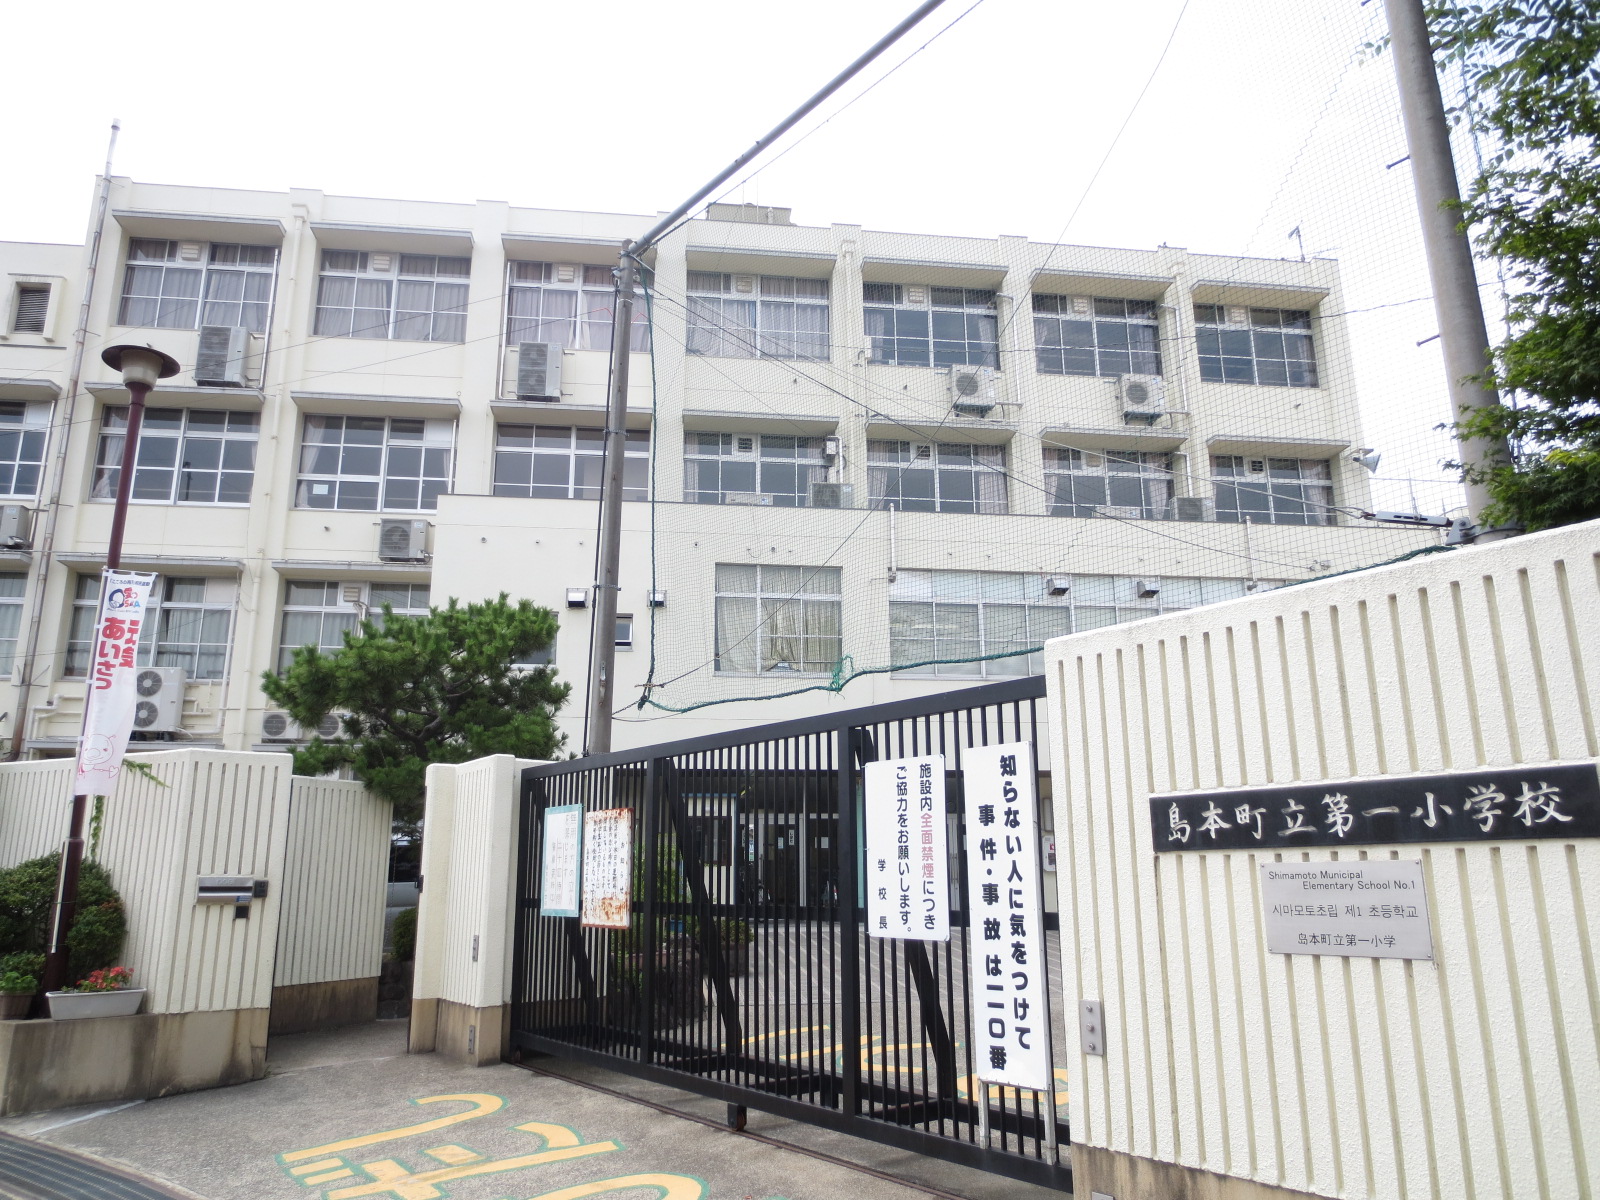 Primary school. 310m until Shimamoto stand first elementary school (elementary school)